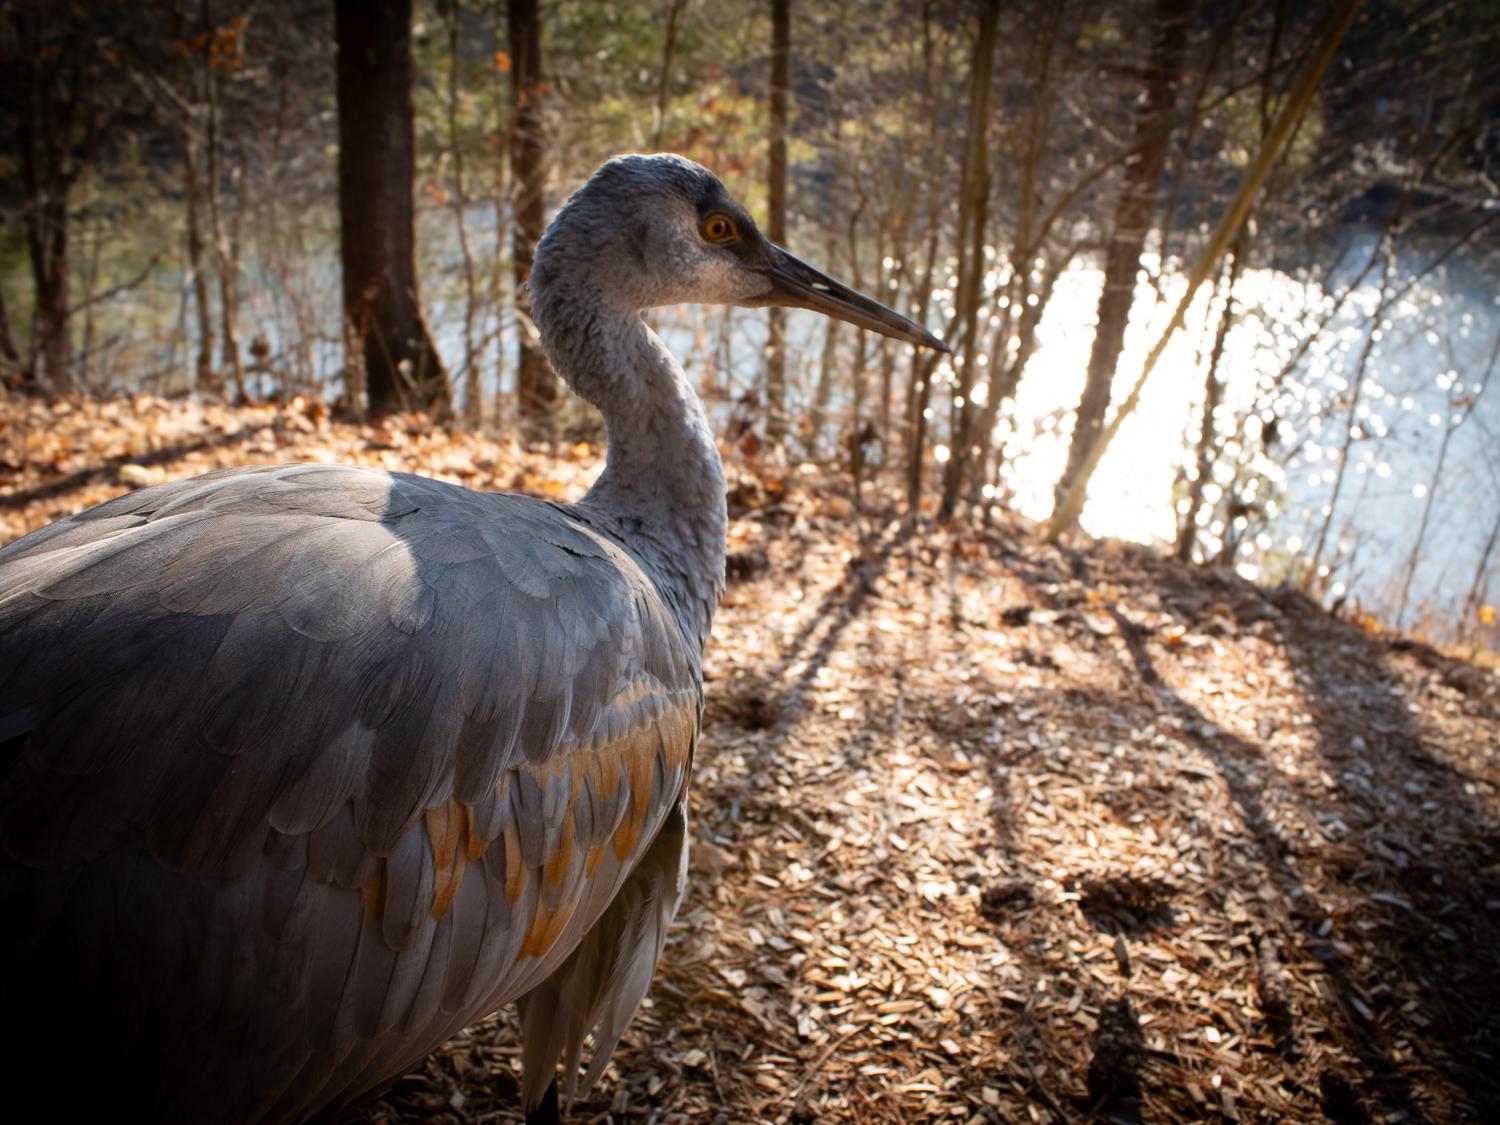 Sandhill crane looks out over lake at Shaver's Creek